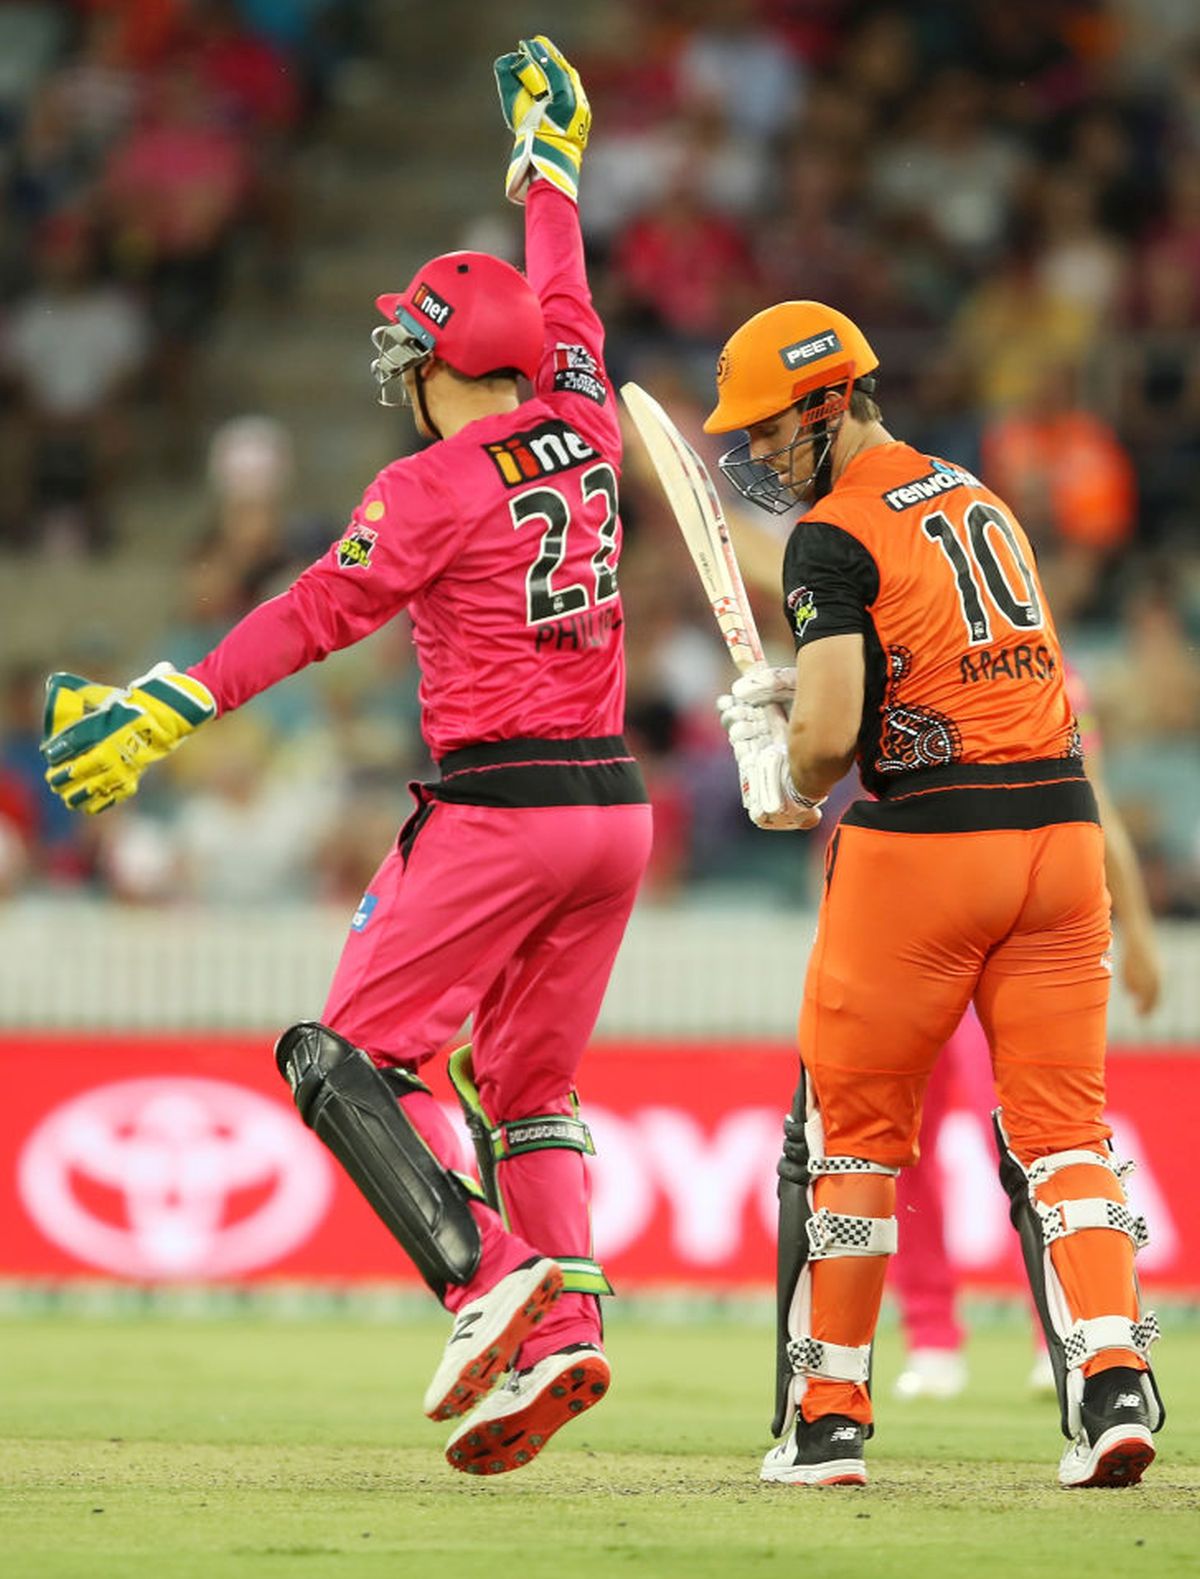 Sydney Sixers' Josh Philippe successfully appeals for the wicket of Perth Scorchers' Mitch Marsh during the Big Bash League at Manuka Oval, in Canberra, on Saturday